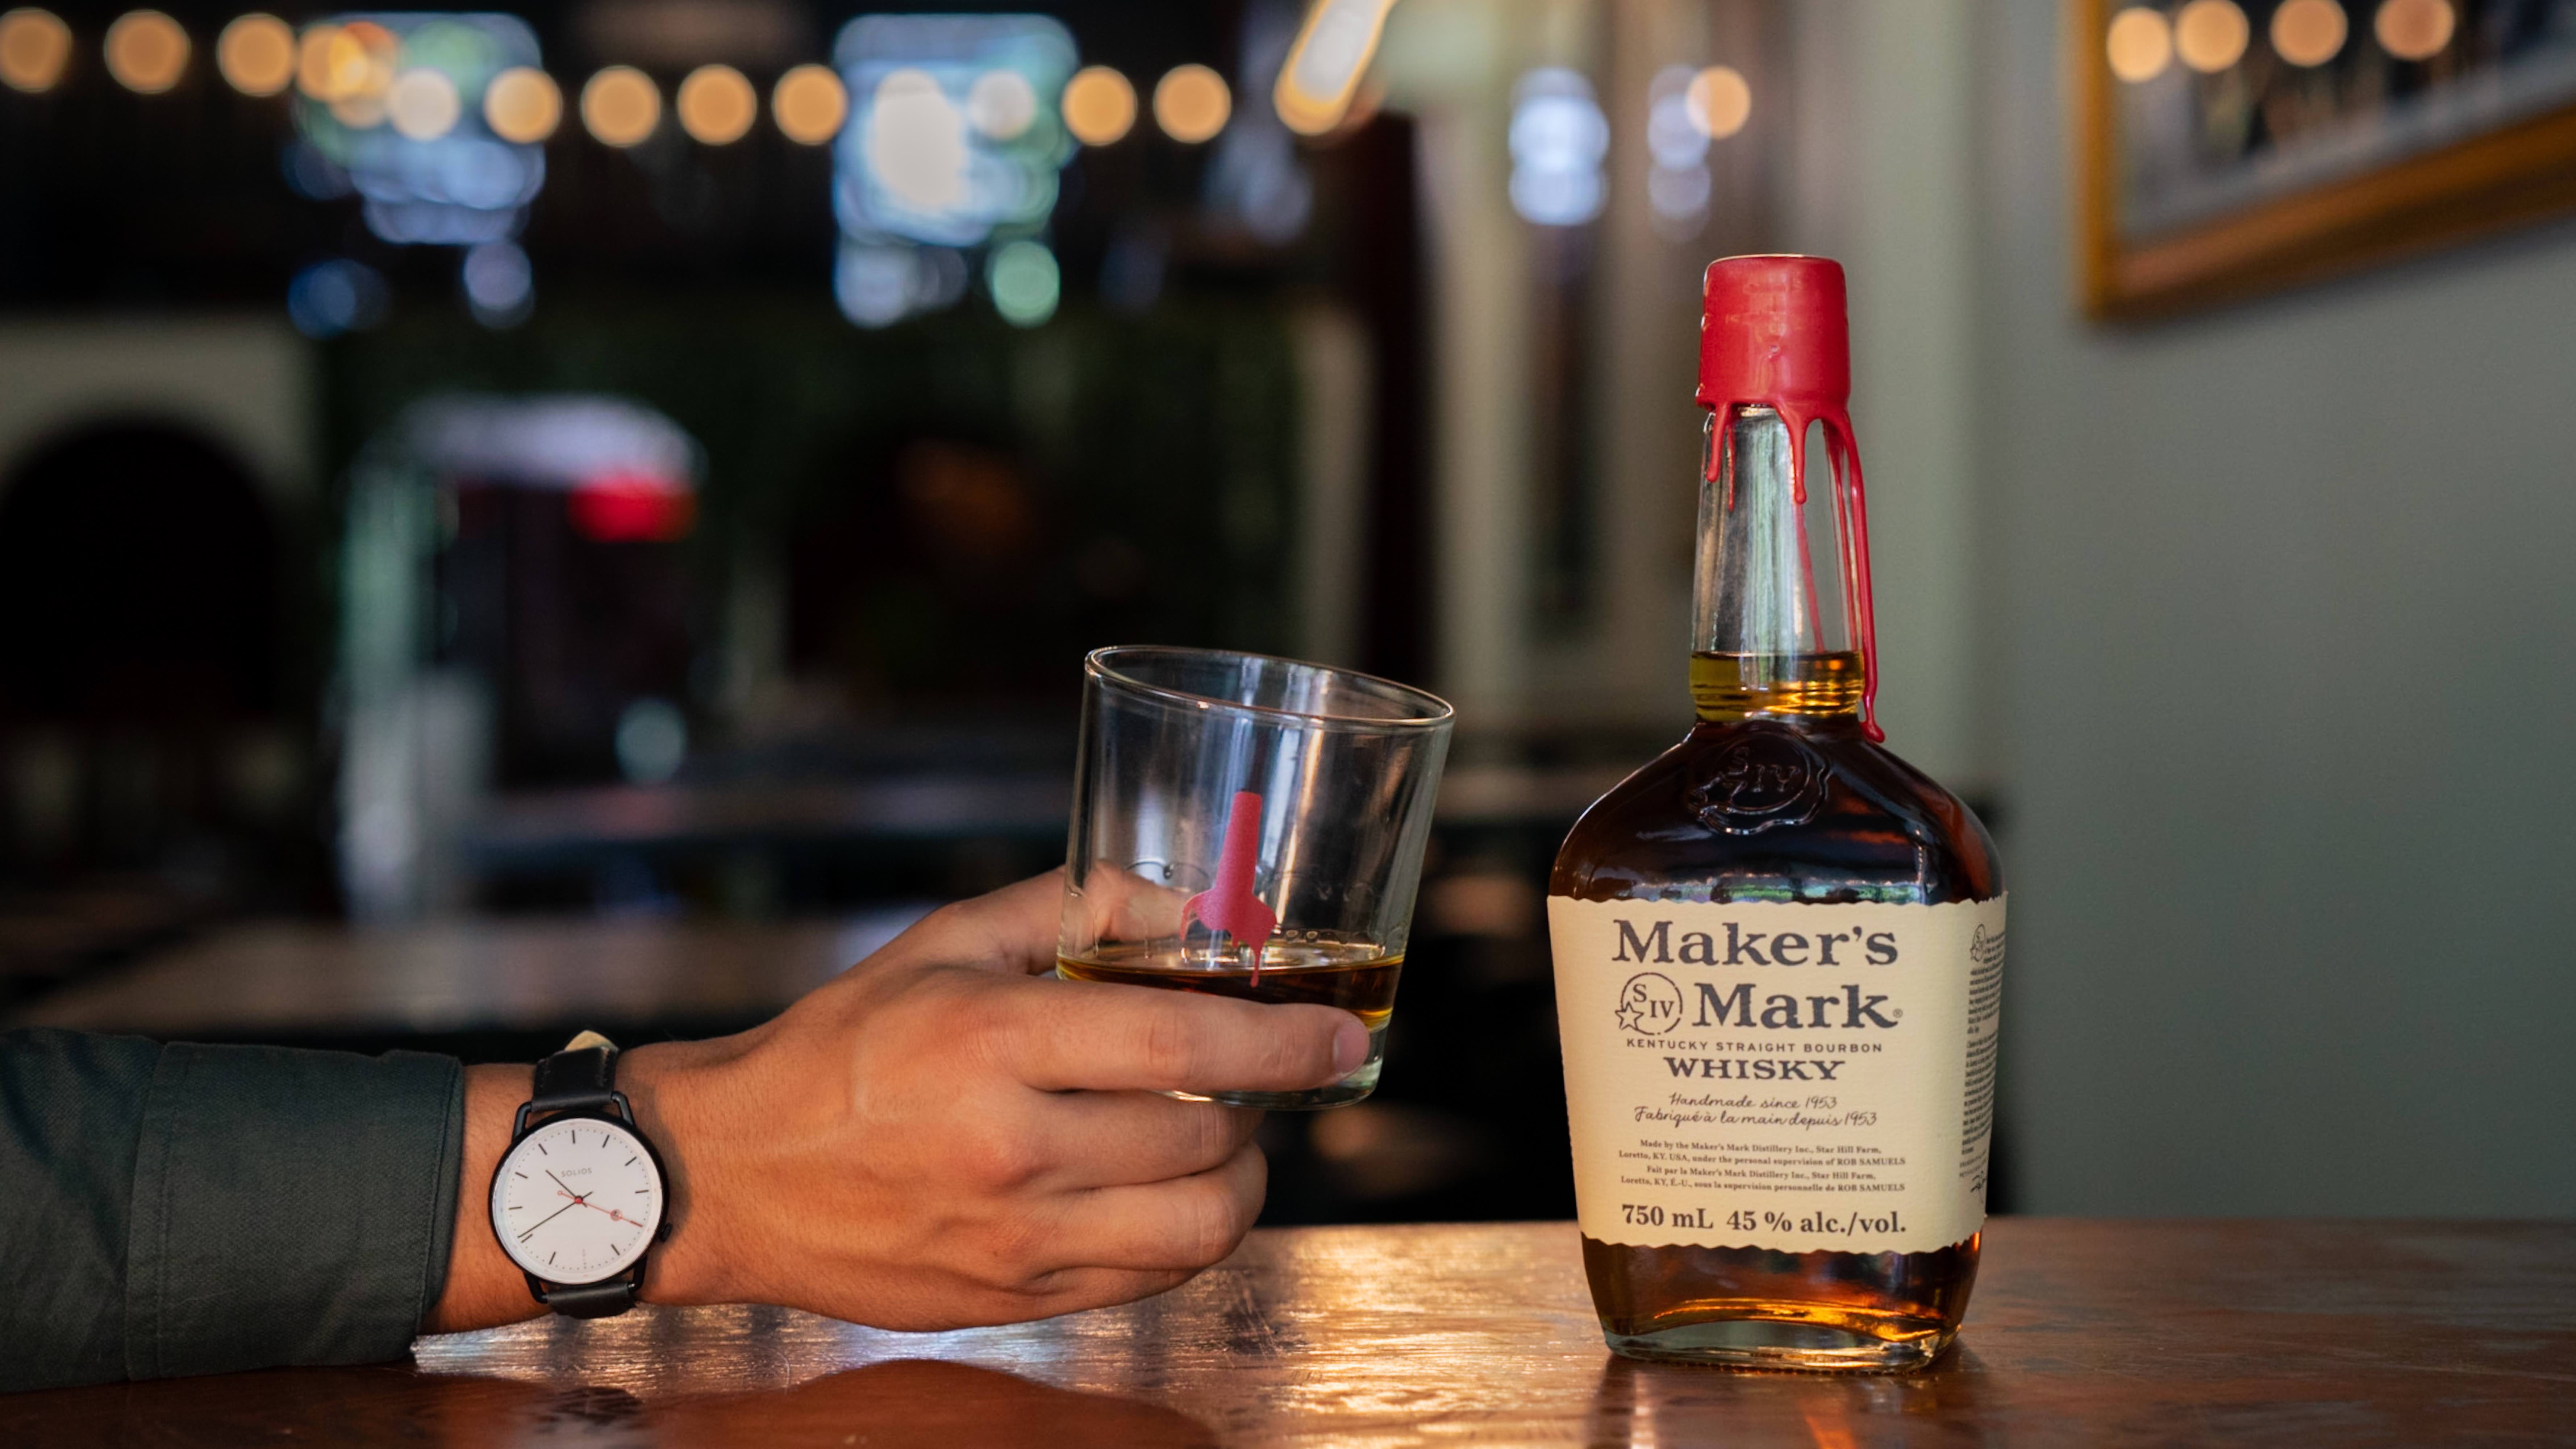 Maker’s Mark Bourbon Launches Limited Edition Solios Watch